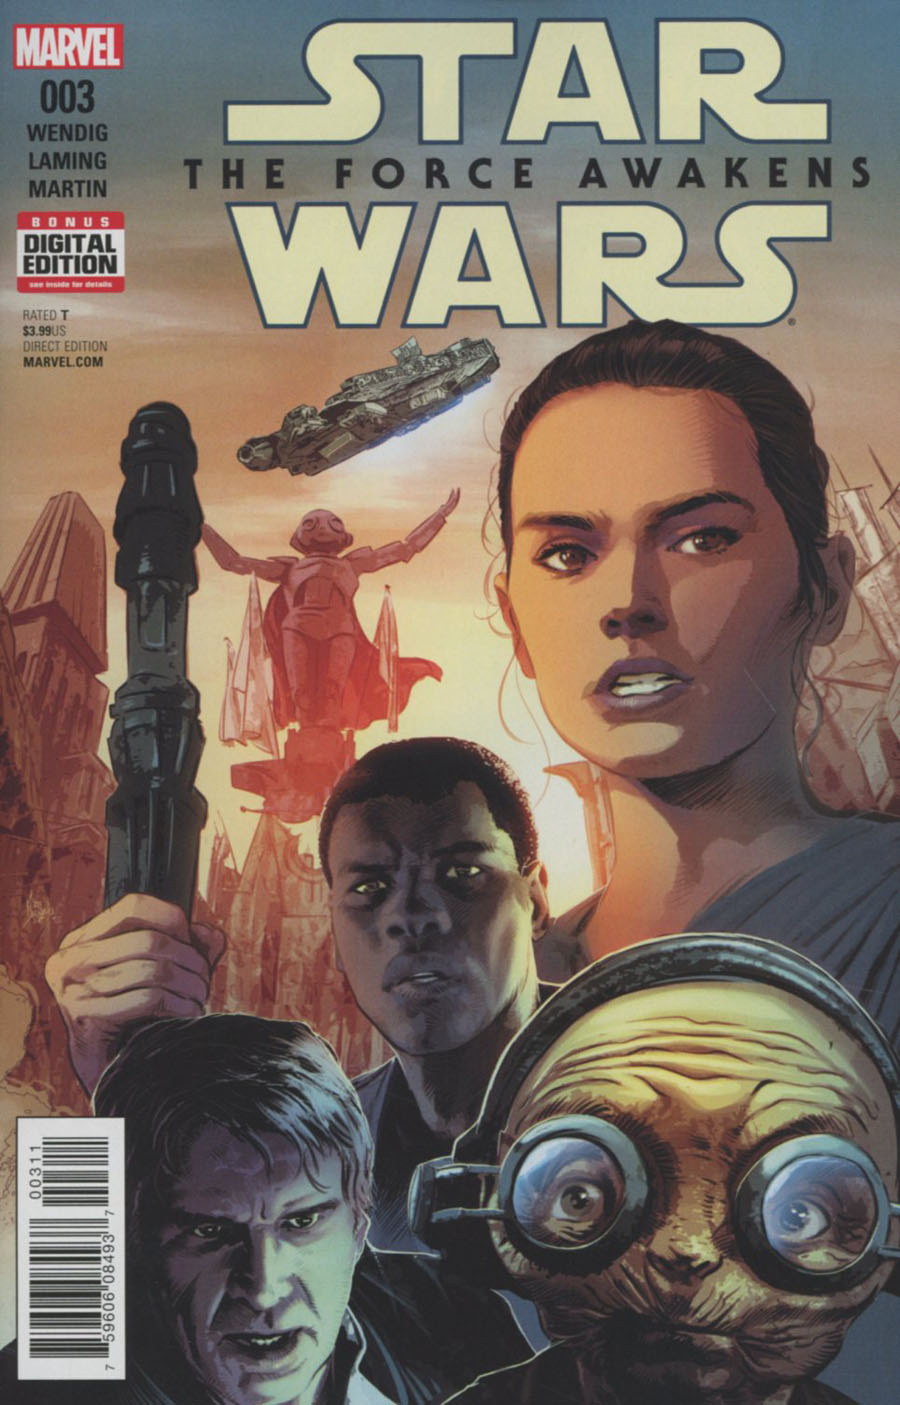 Star Wars Episode VII The Force Awakens Adaptation #3 Cover A Regular Mike Deodato Jr Cover